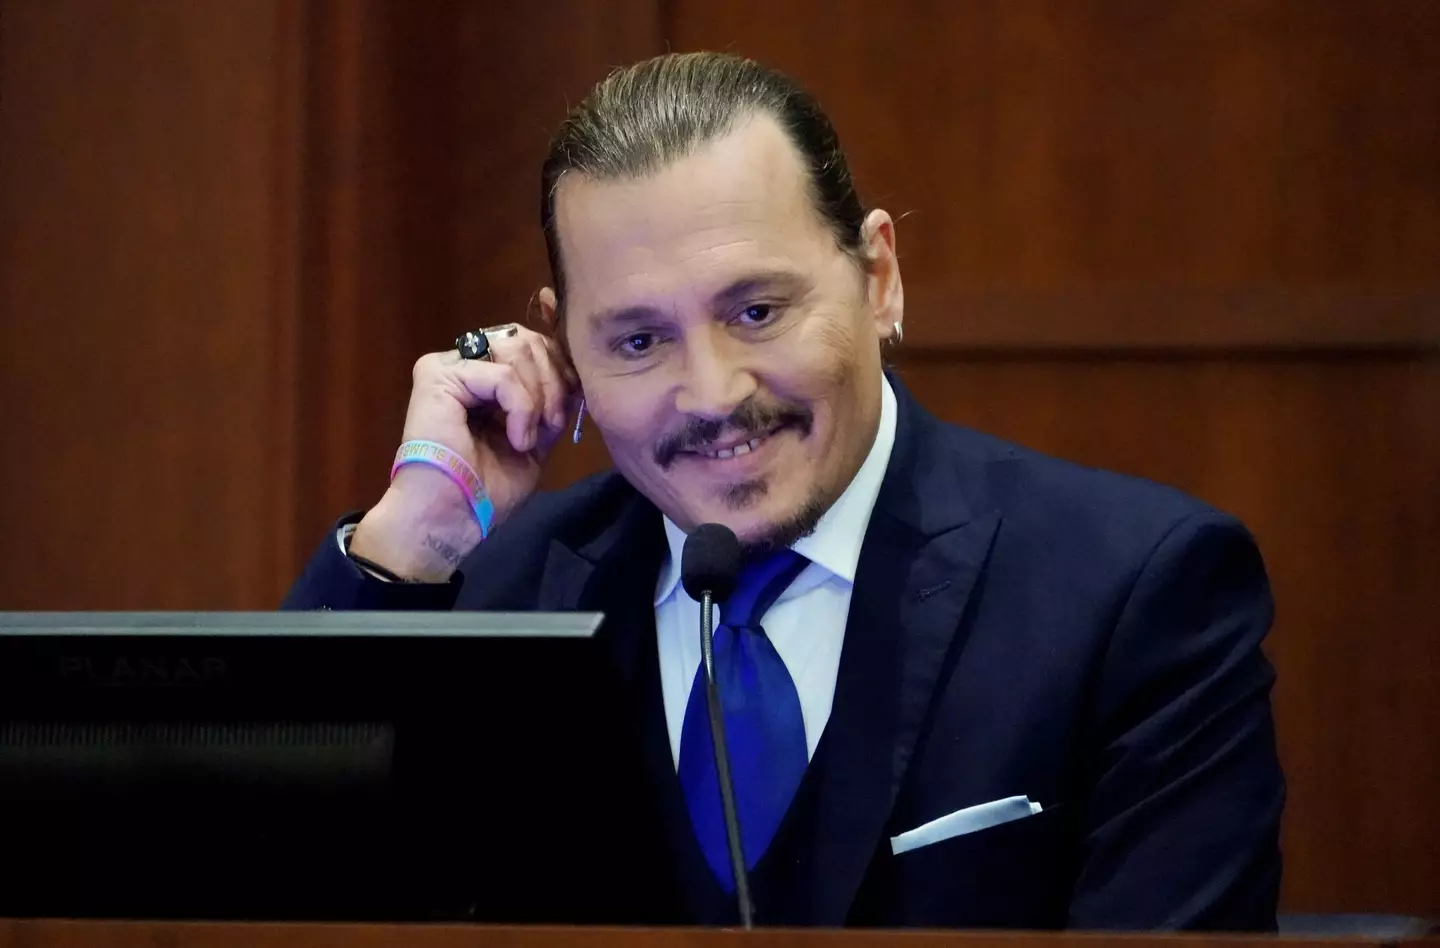 Depp explained the poo was so 'grotesque' that he could 'only laugh'.